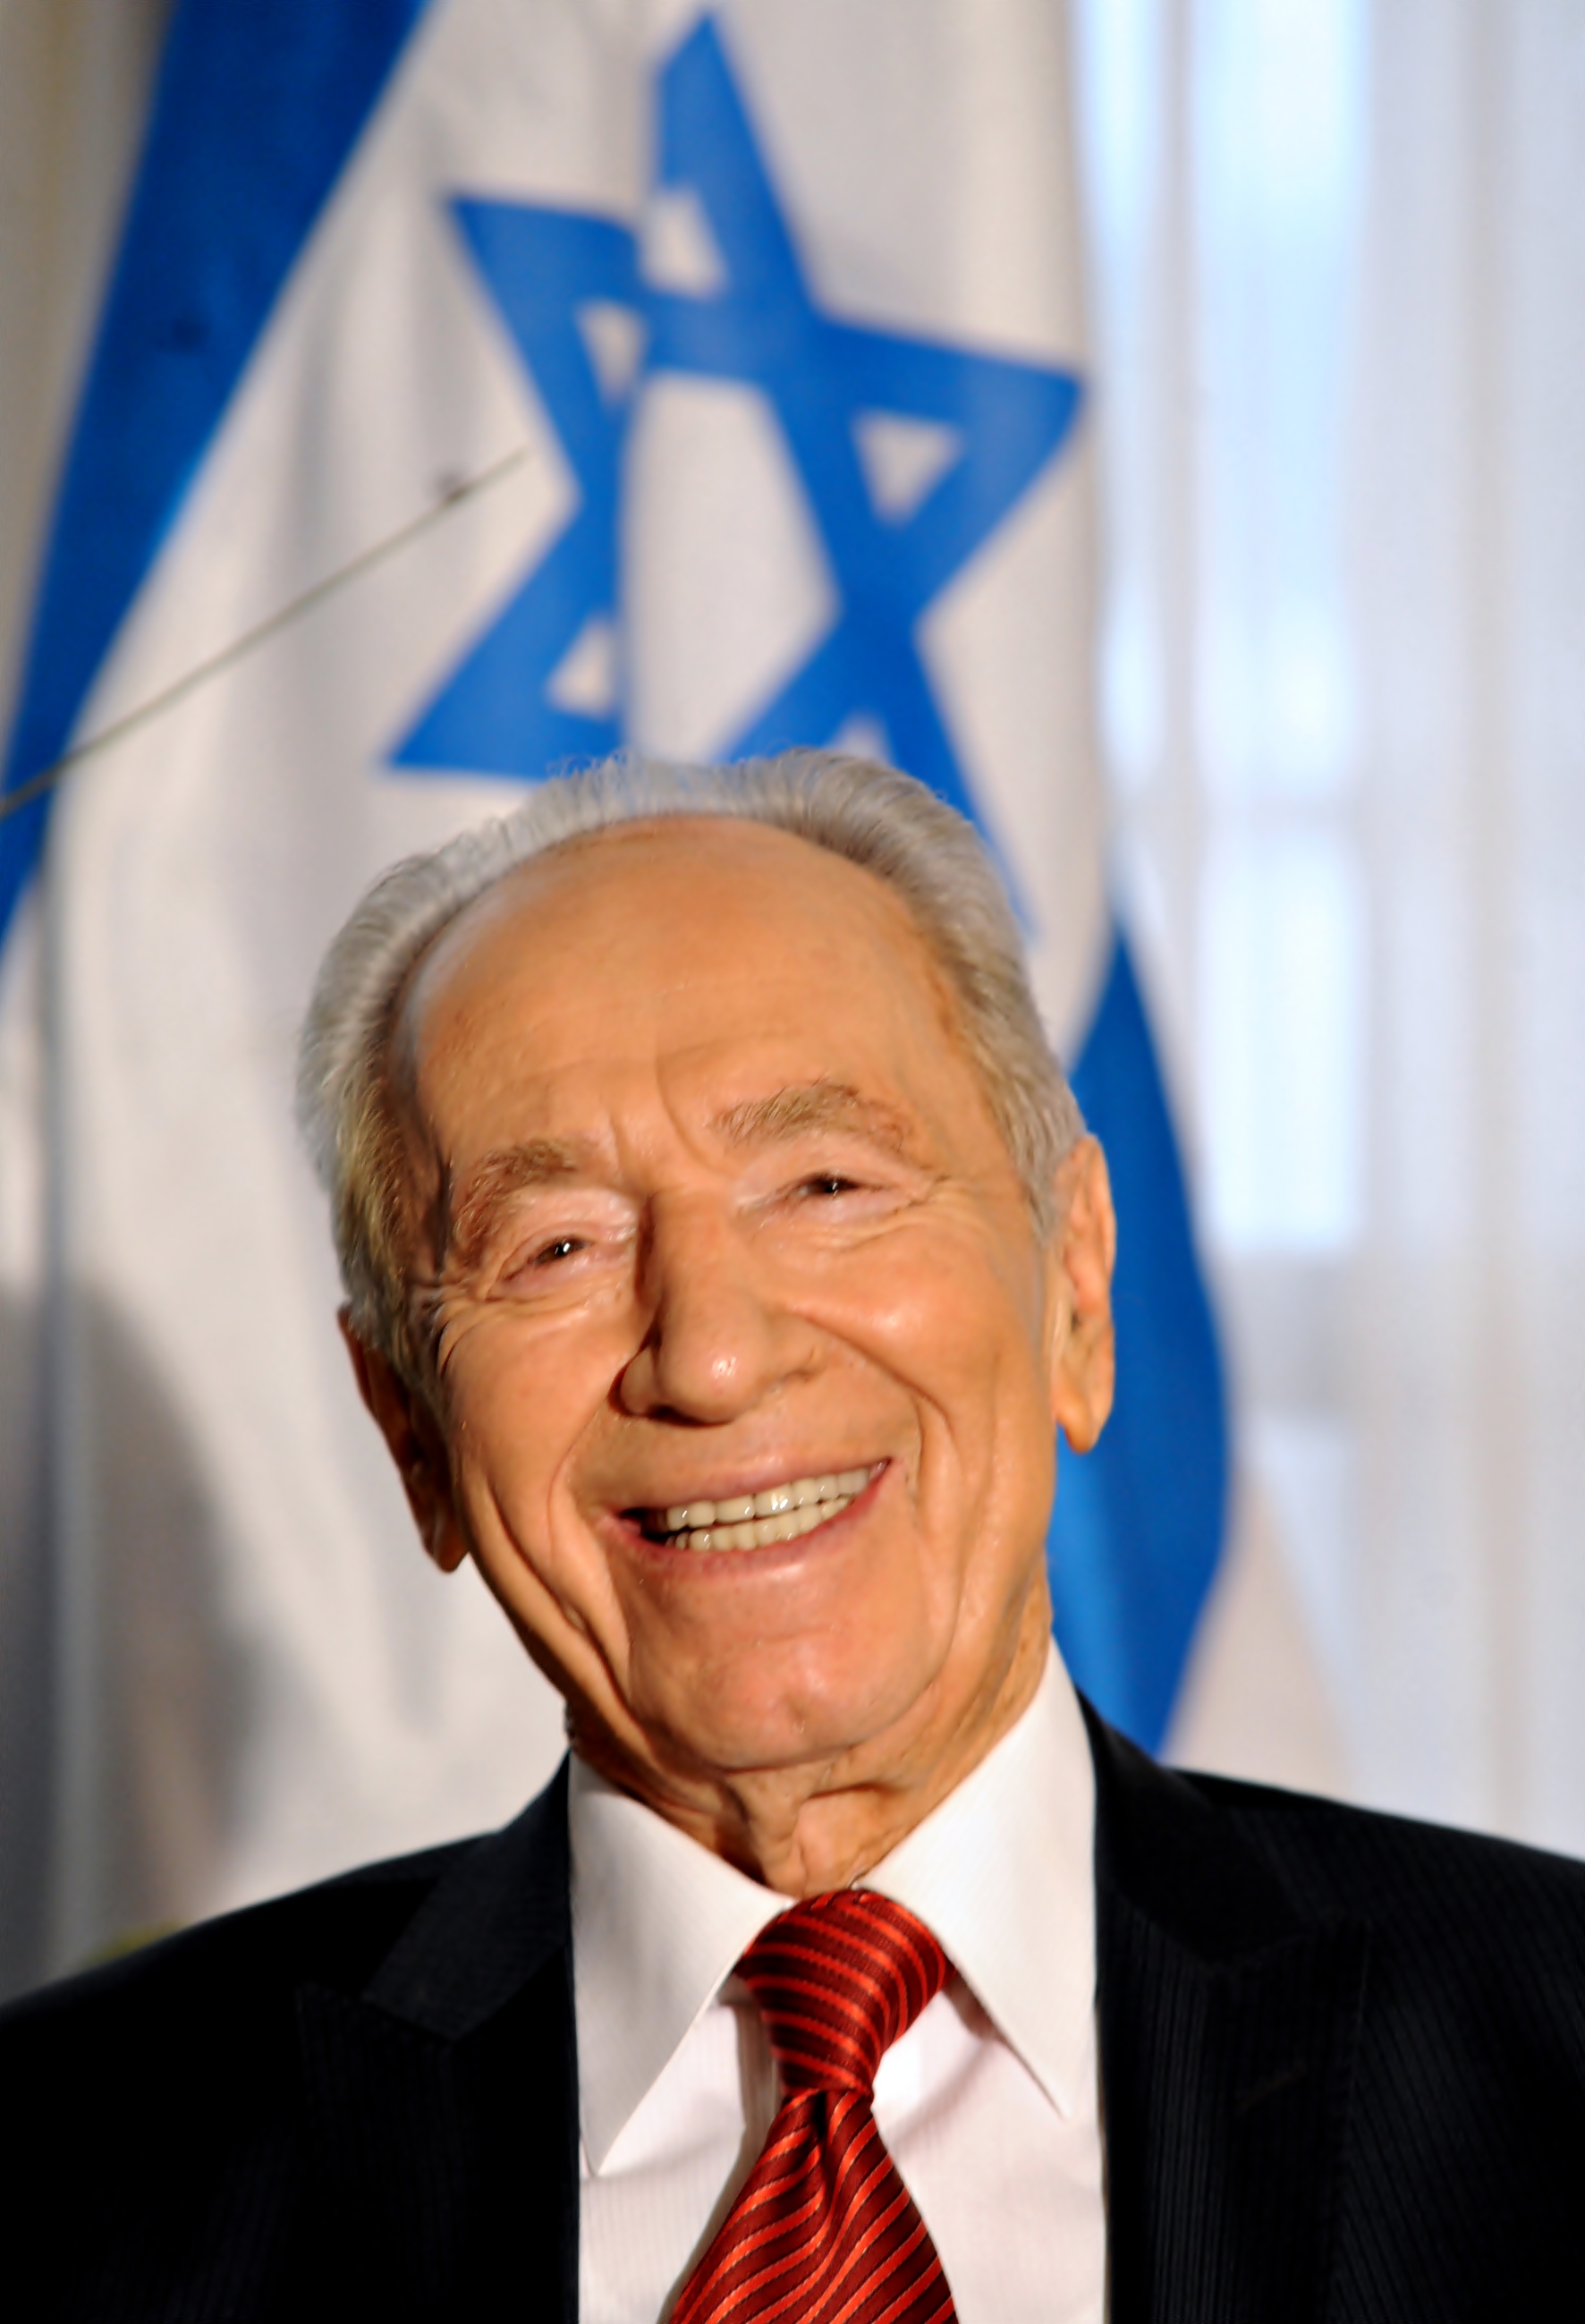 post about Inheritance Laws: Shimon Peres, Leader and Ex-President of Israel, Dies